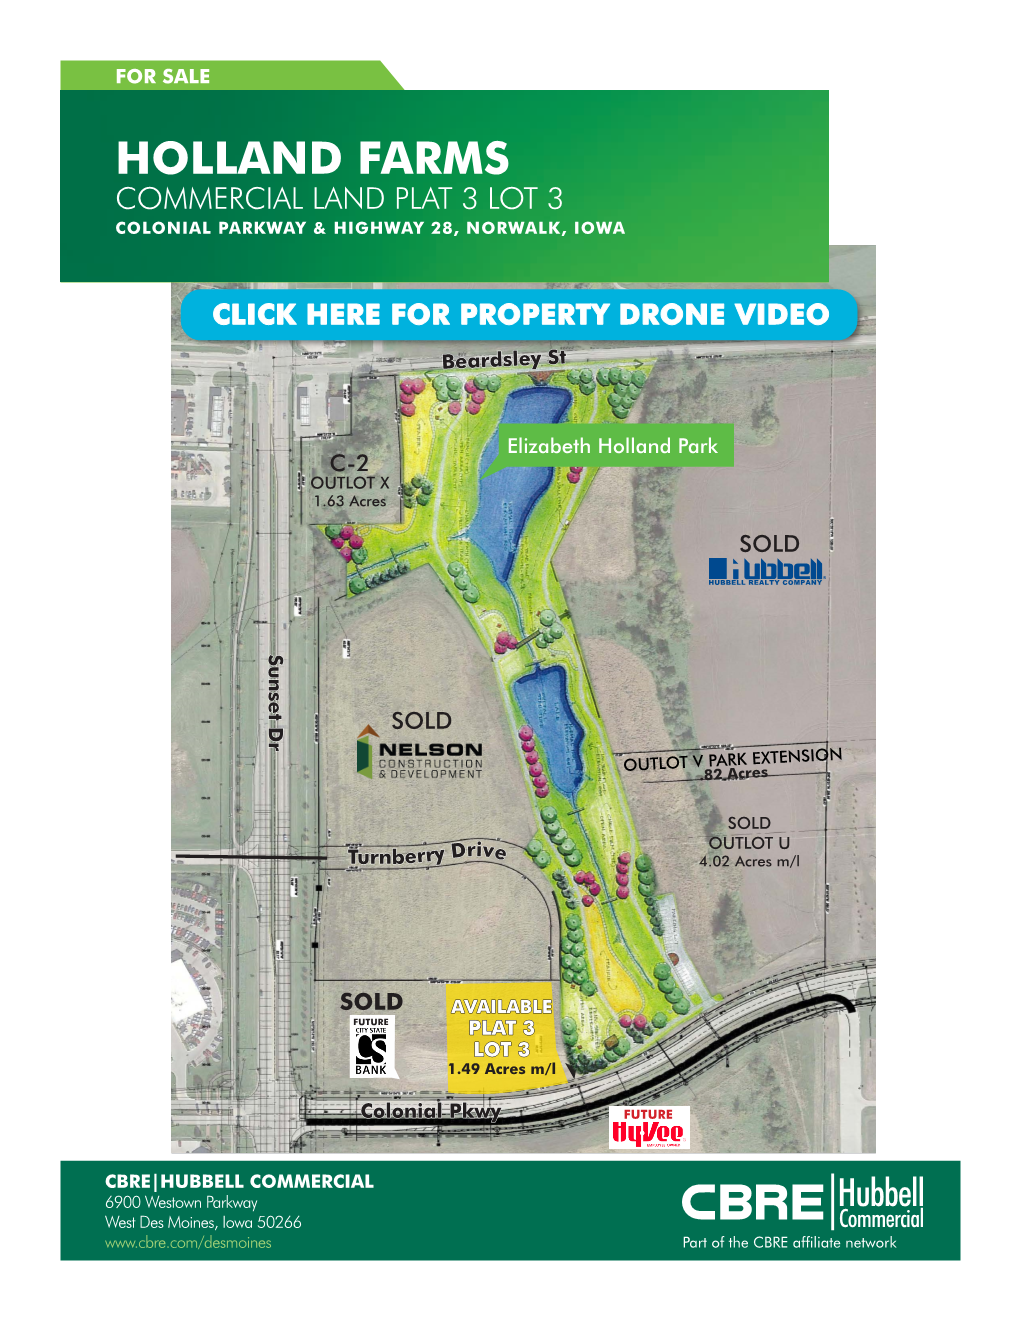 Holland Farms Commercial Land Plat 3 Lot 3 Colonial Parkway & Highway 28, Norwalk, Iowa